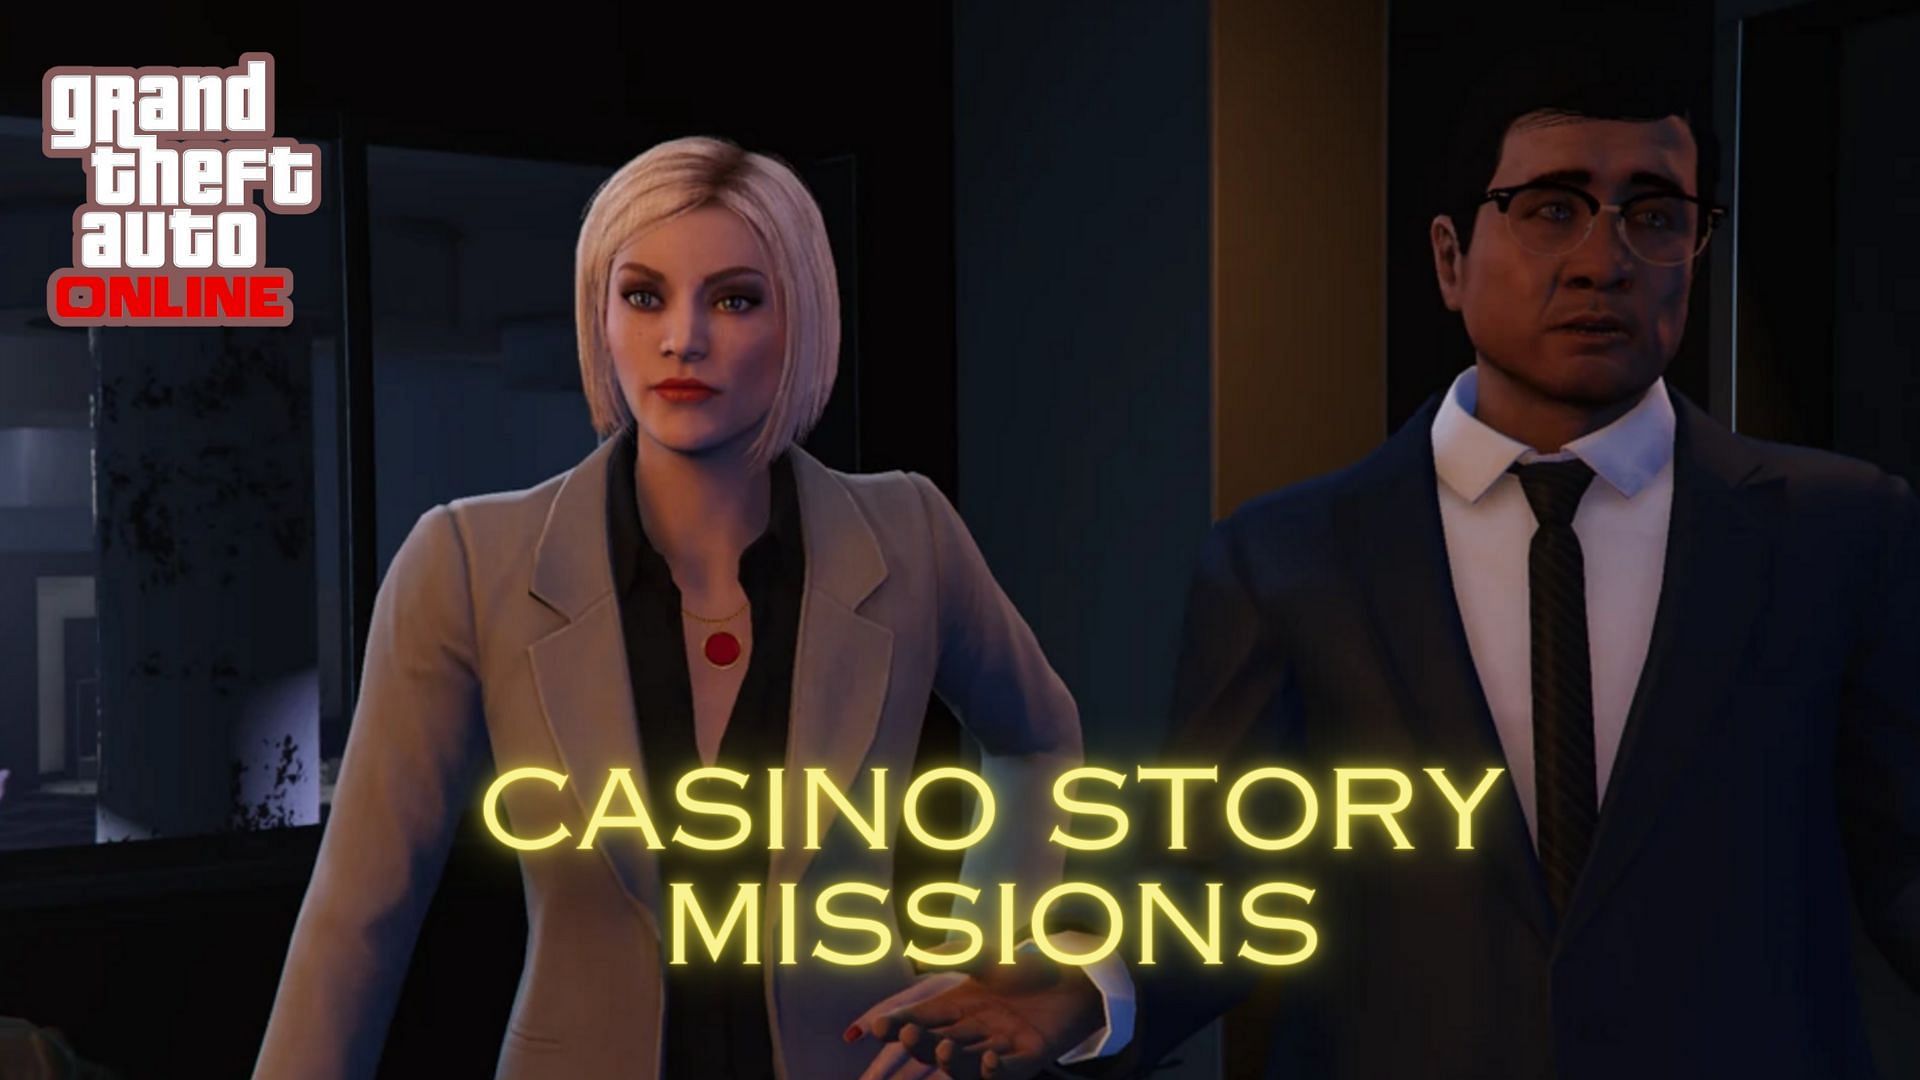 GTA Online Casino Story Missions: How to get started, rewards, and more